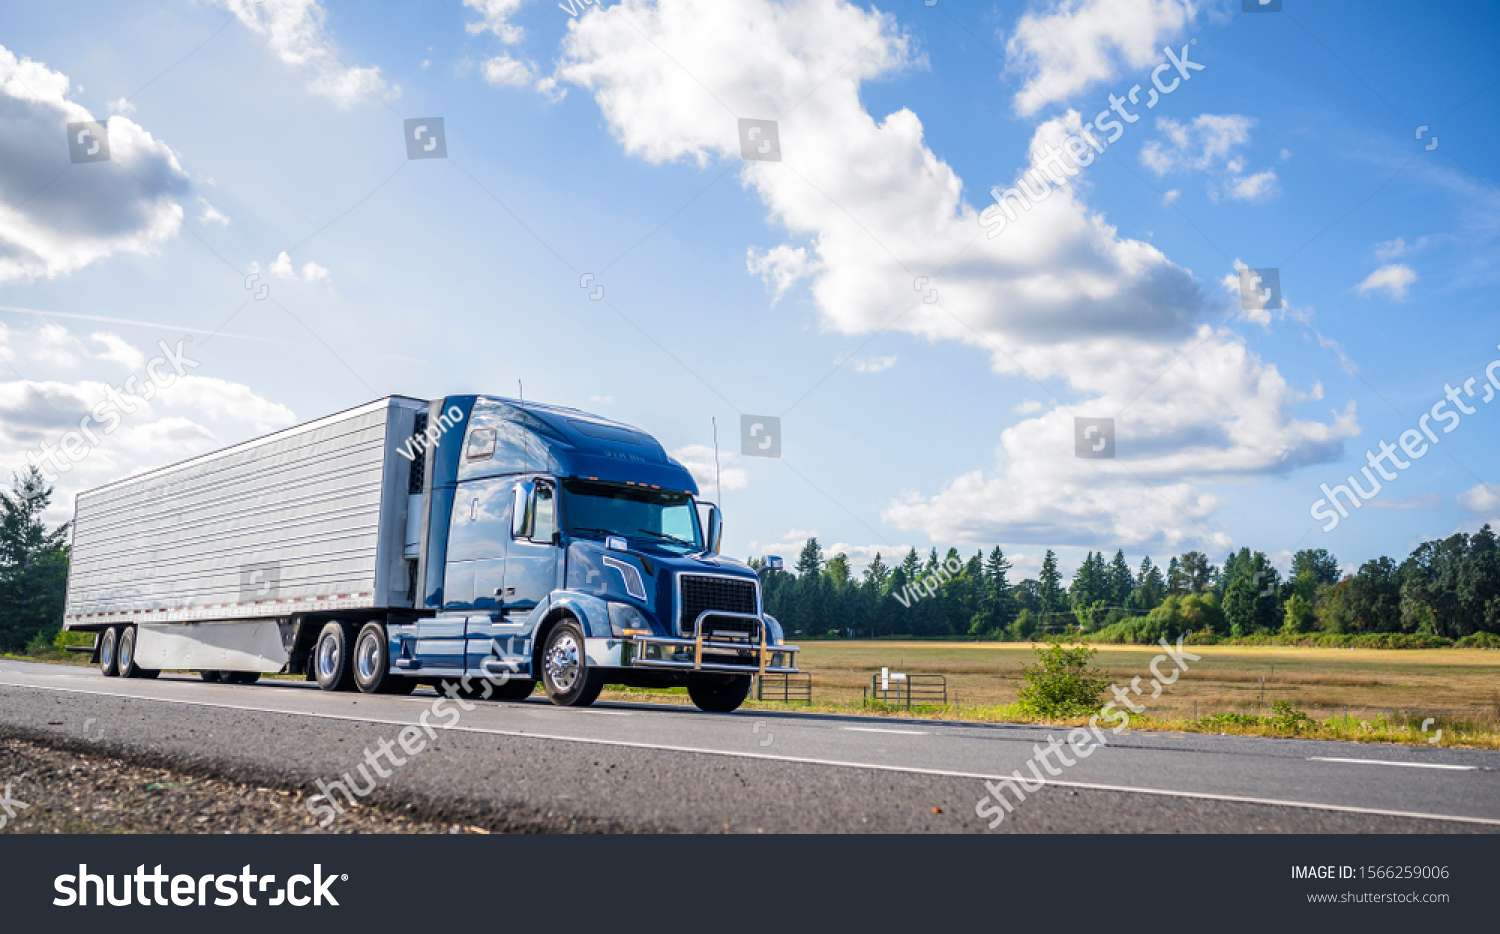 Big rig powerful professional industrial blue bonnet semi truck for long haul delivery commercial cargo going with refrigerator semi trailer on the summer road with forest and meadows on the sides #1566259006